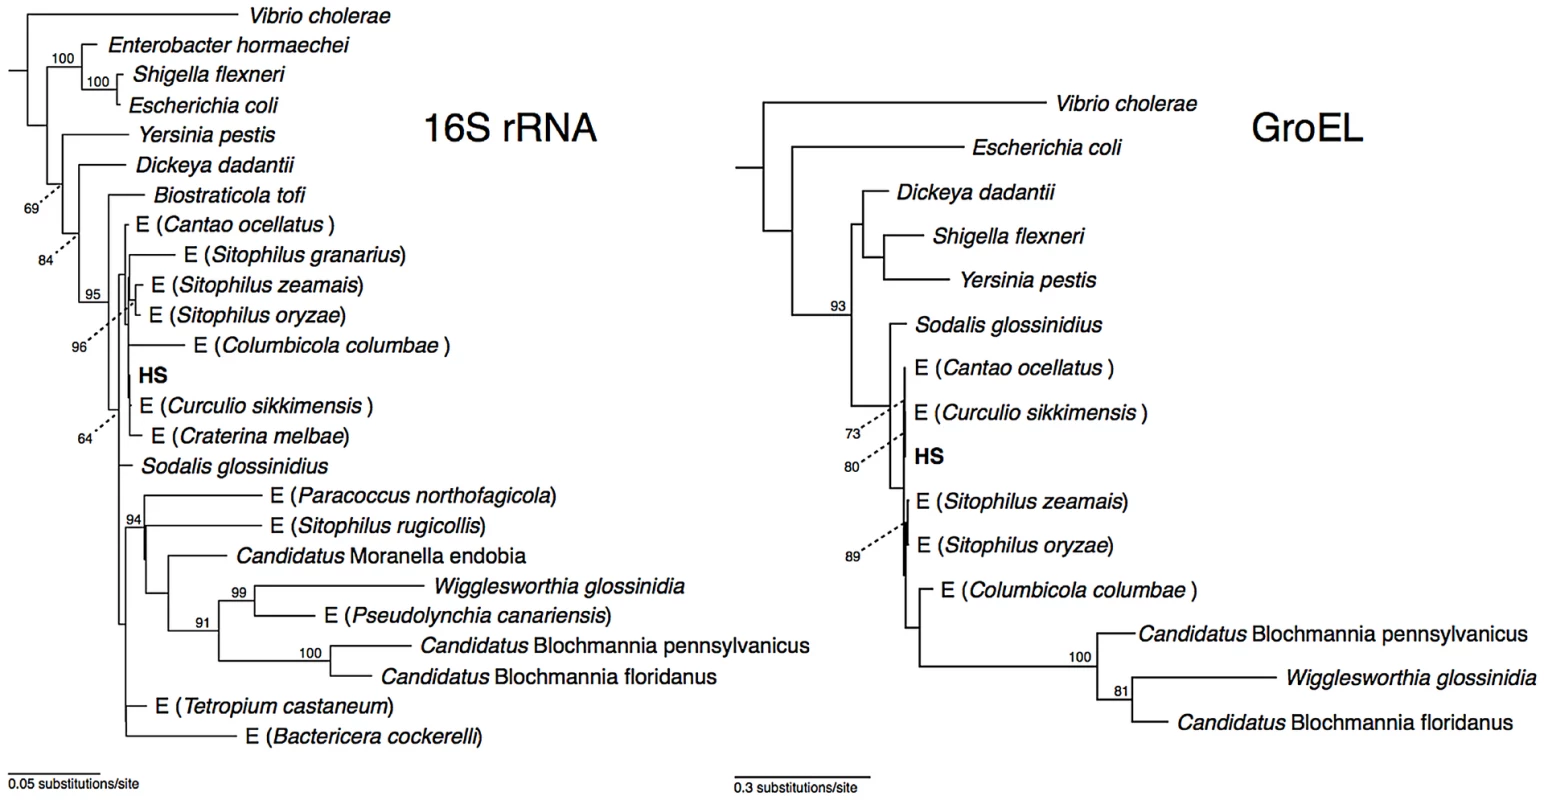 Phylogeny of strain HS and related <i>Sodalis</i>-allied endosymbionts and free-living bacteria based on maximum likelihood analyses of a 1.46 kb fragment of 16S rRNA and a 1.68 kb fragment of <i>groEL</i>.